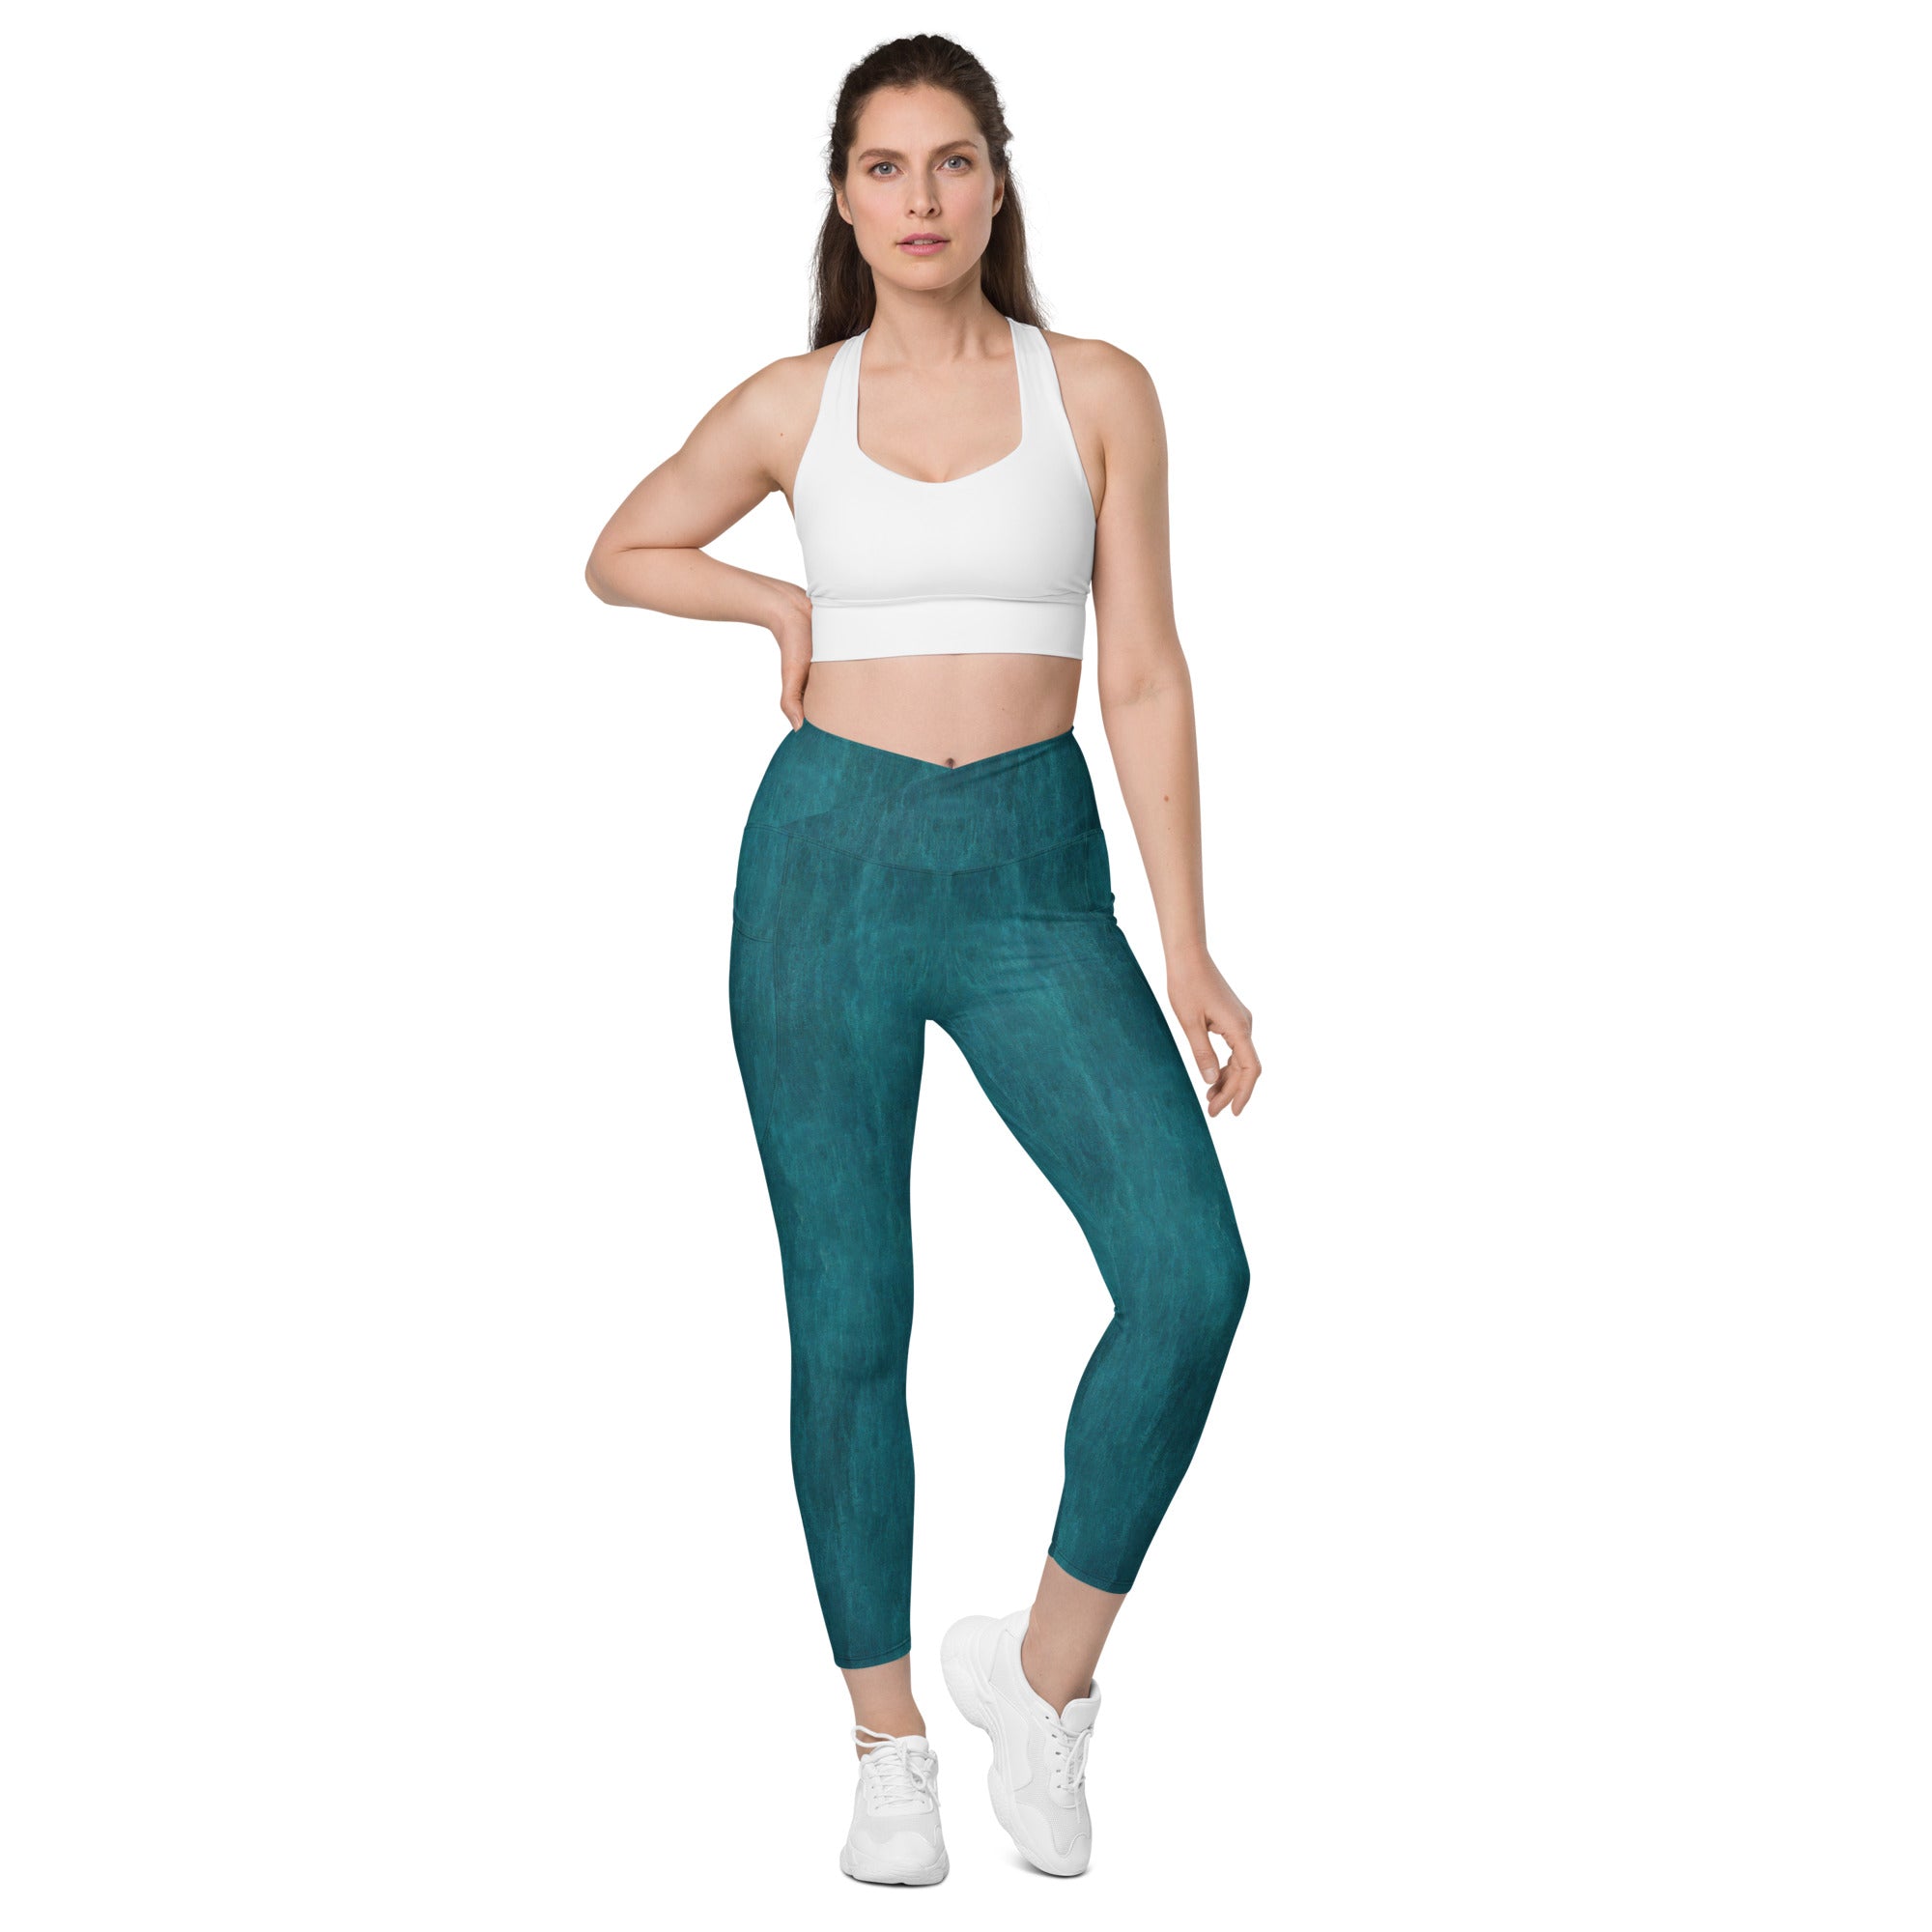 Cloud Nine Crossover Leggings with Sleek Pockets Front View